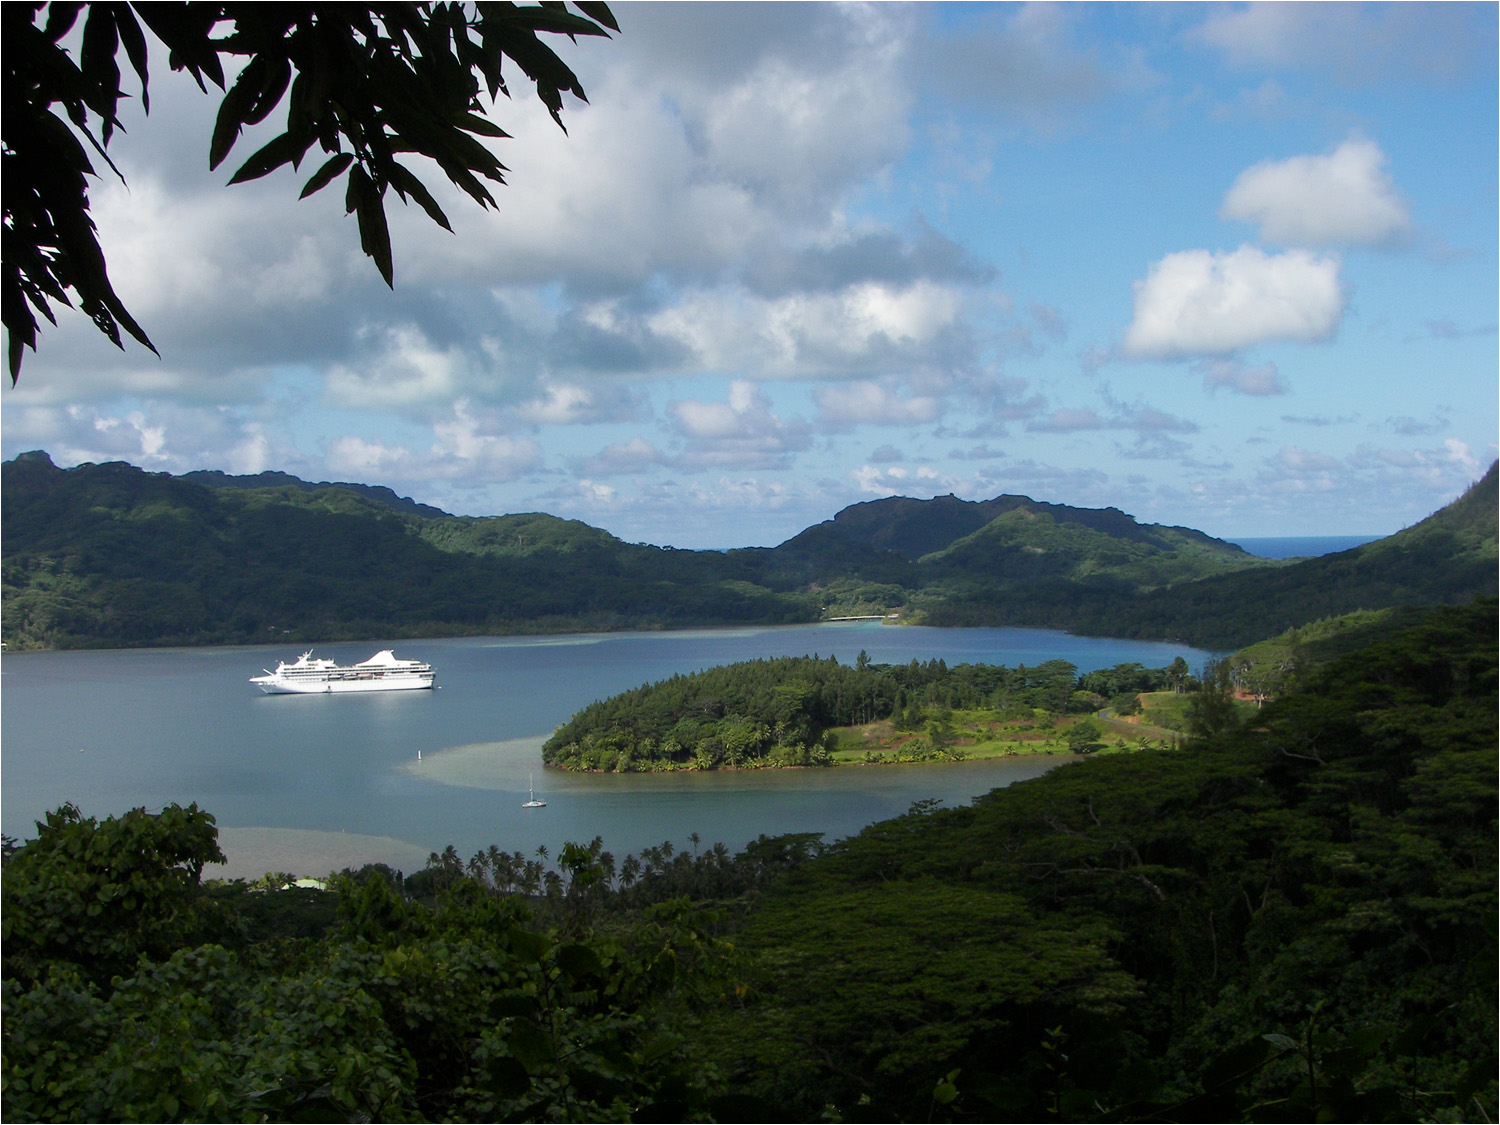 Scenic stop on our tour of Huahine with ship anchored in the lagoon.  Huahine is actually comprised of two islands, Huahine Nui (large) and Huahine Iti (small) The two islands are joined by a bridge in the far background to the right of the ship